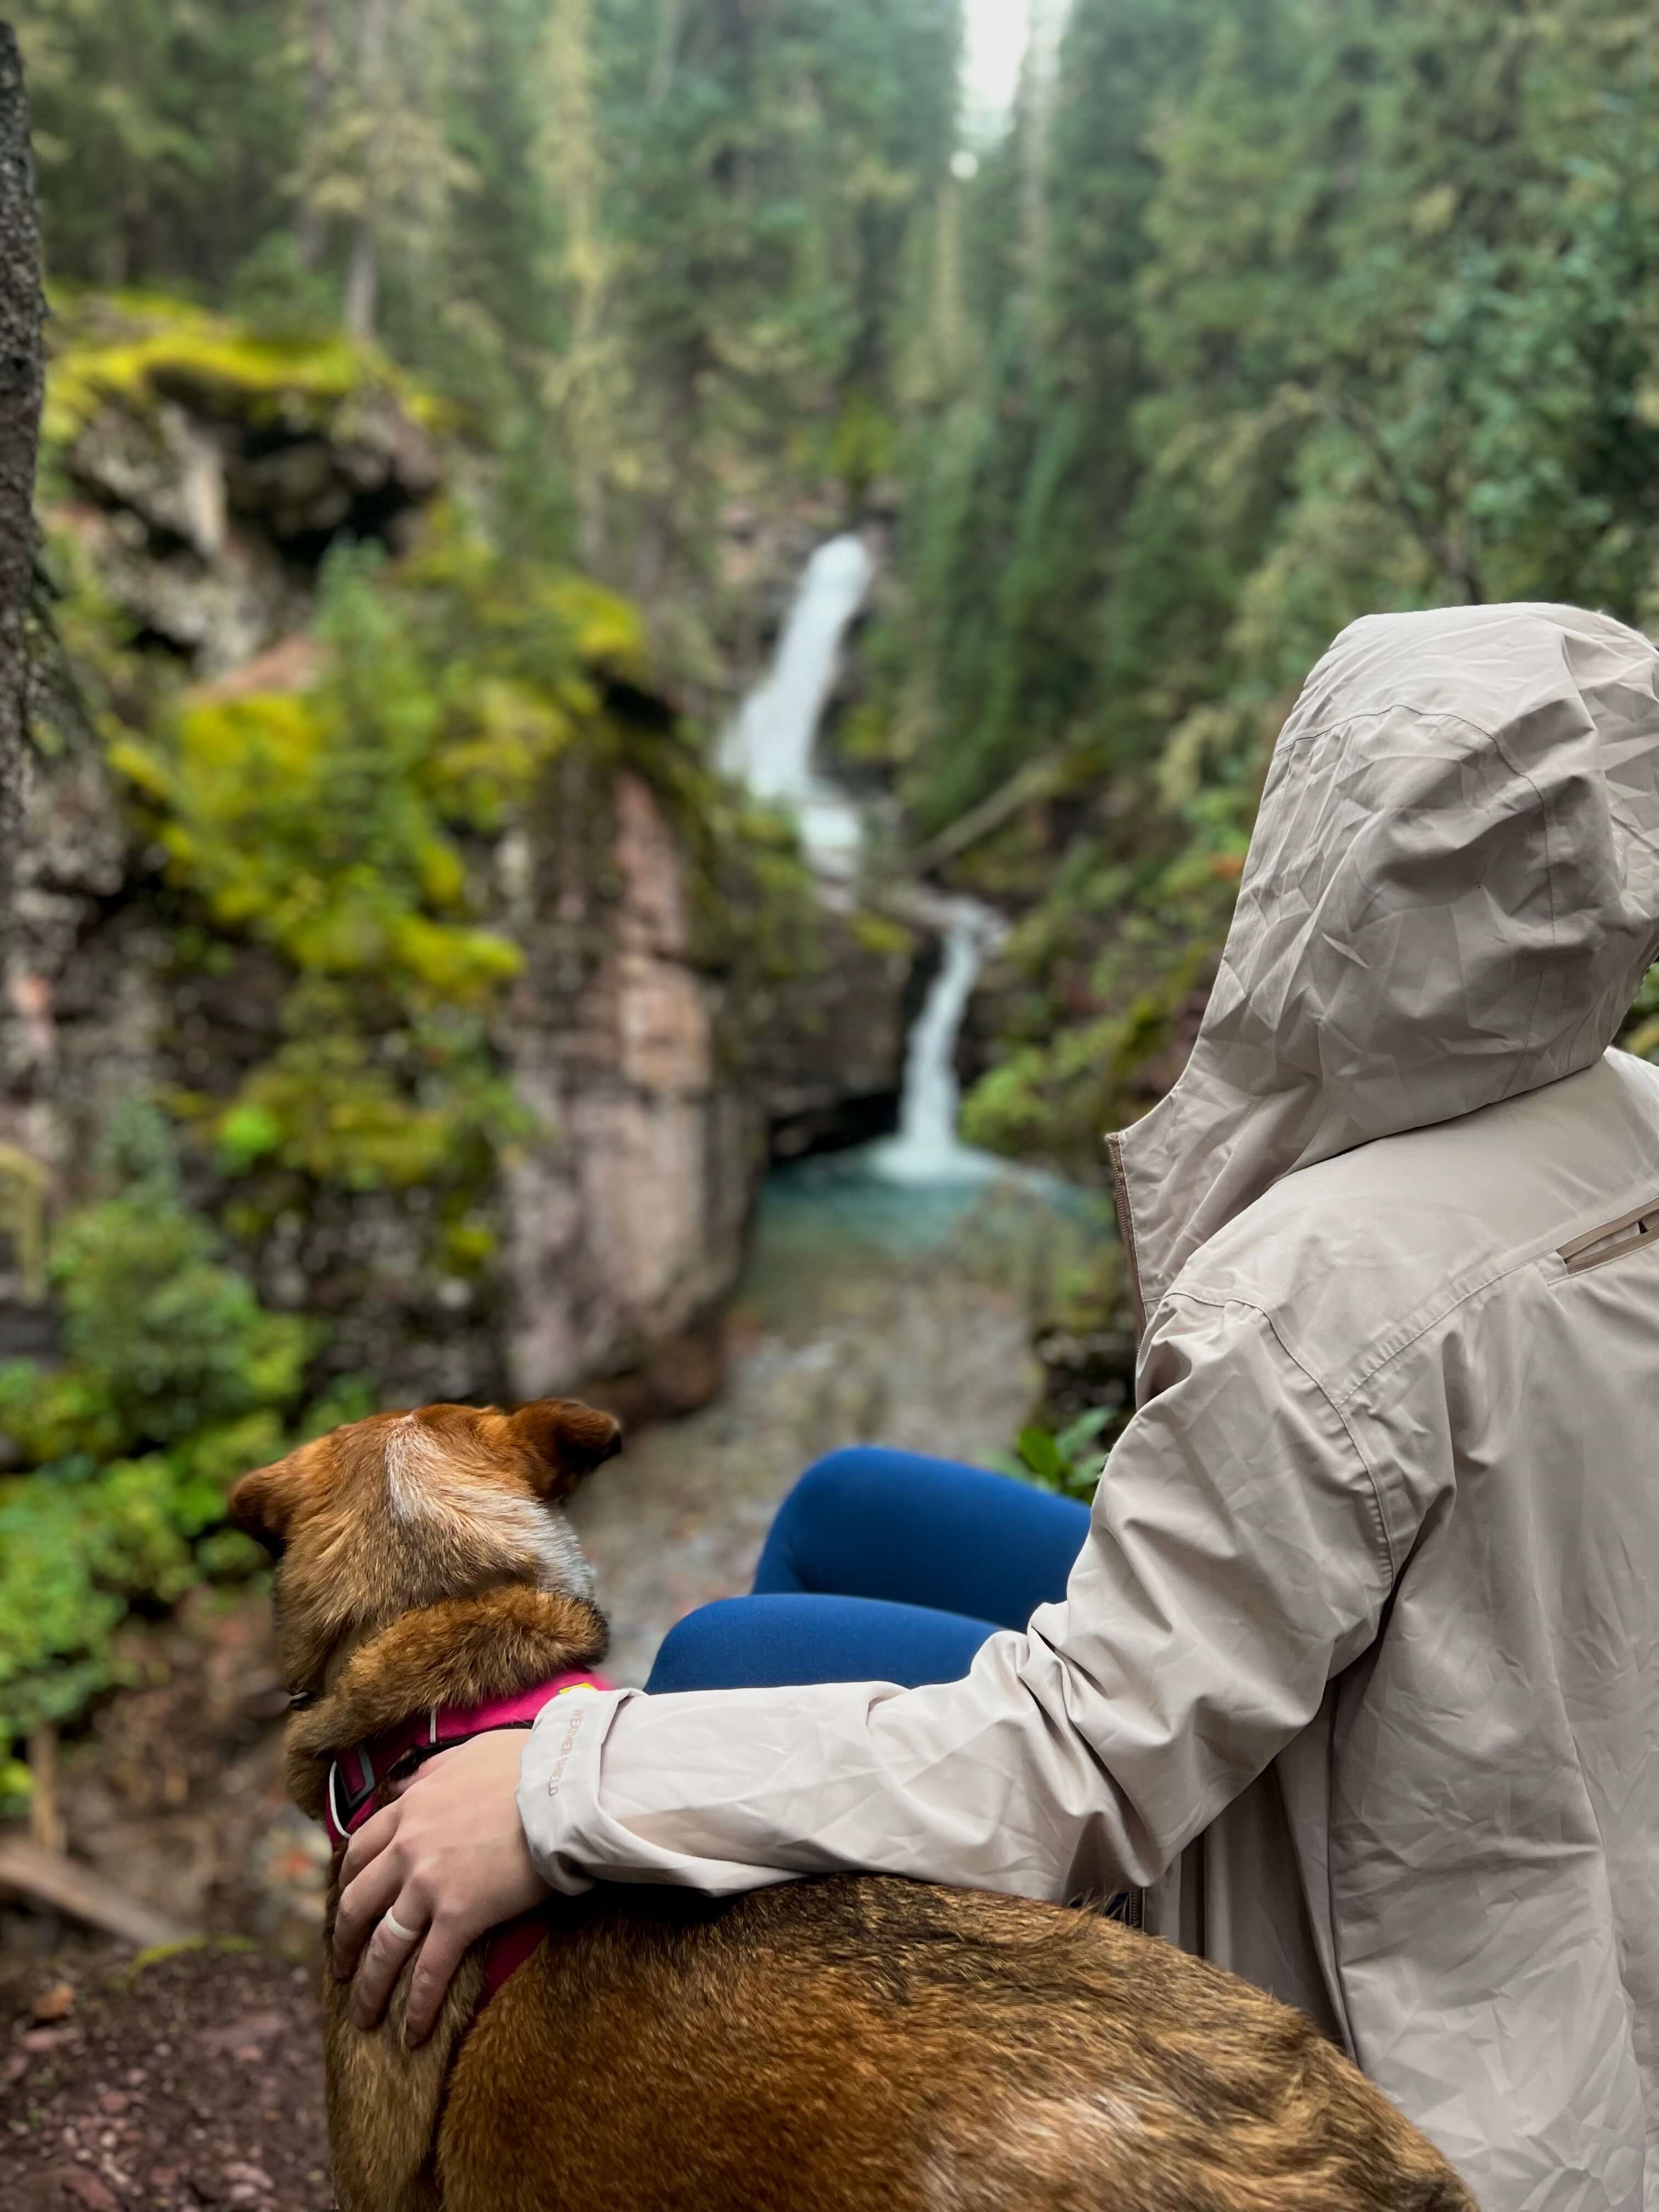 Girl with a Tan Jacket Hugging her Dog in Nature